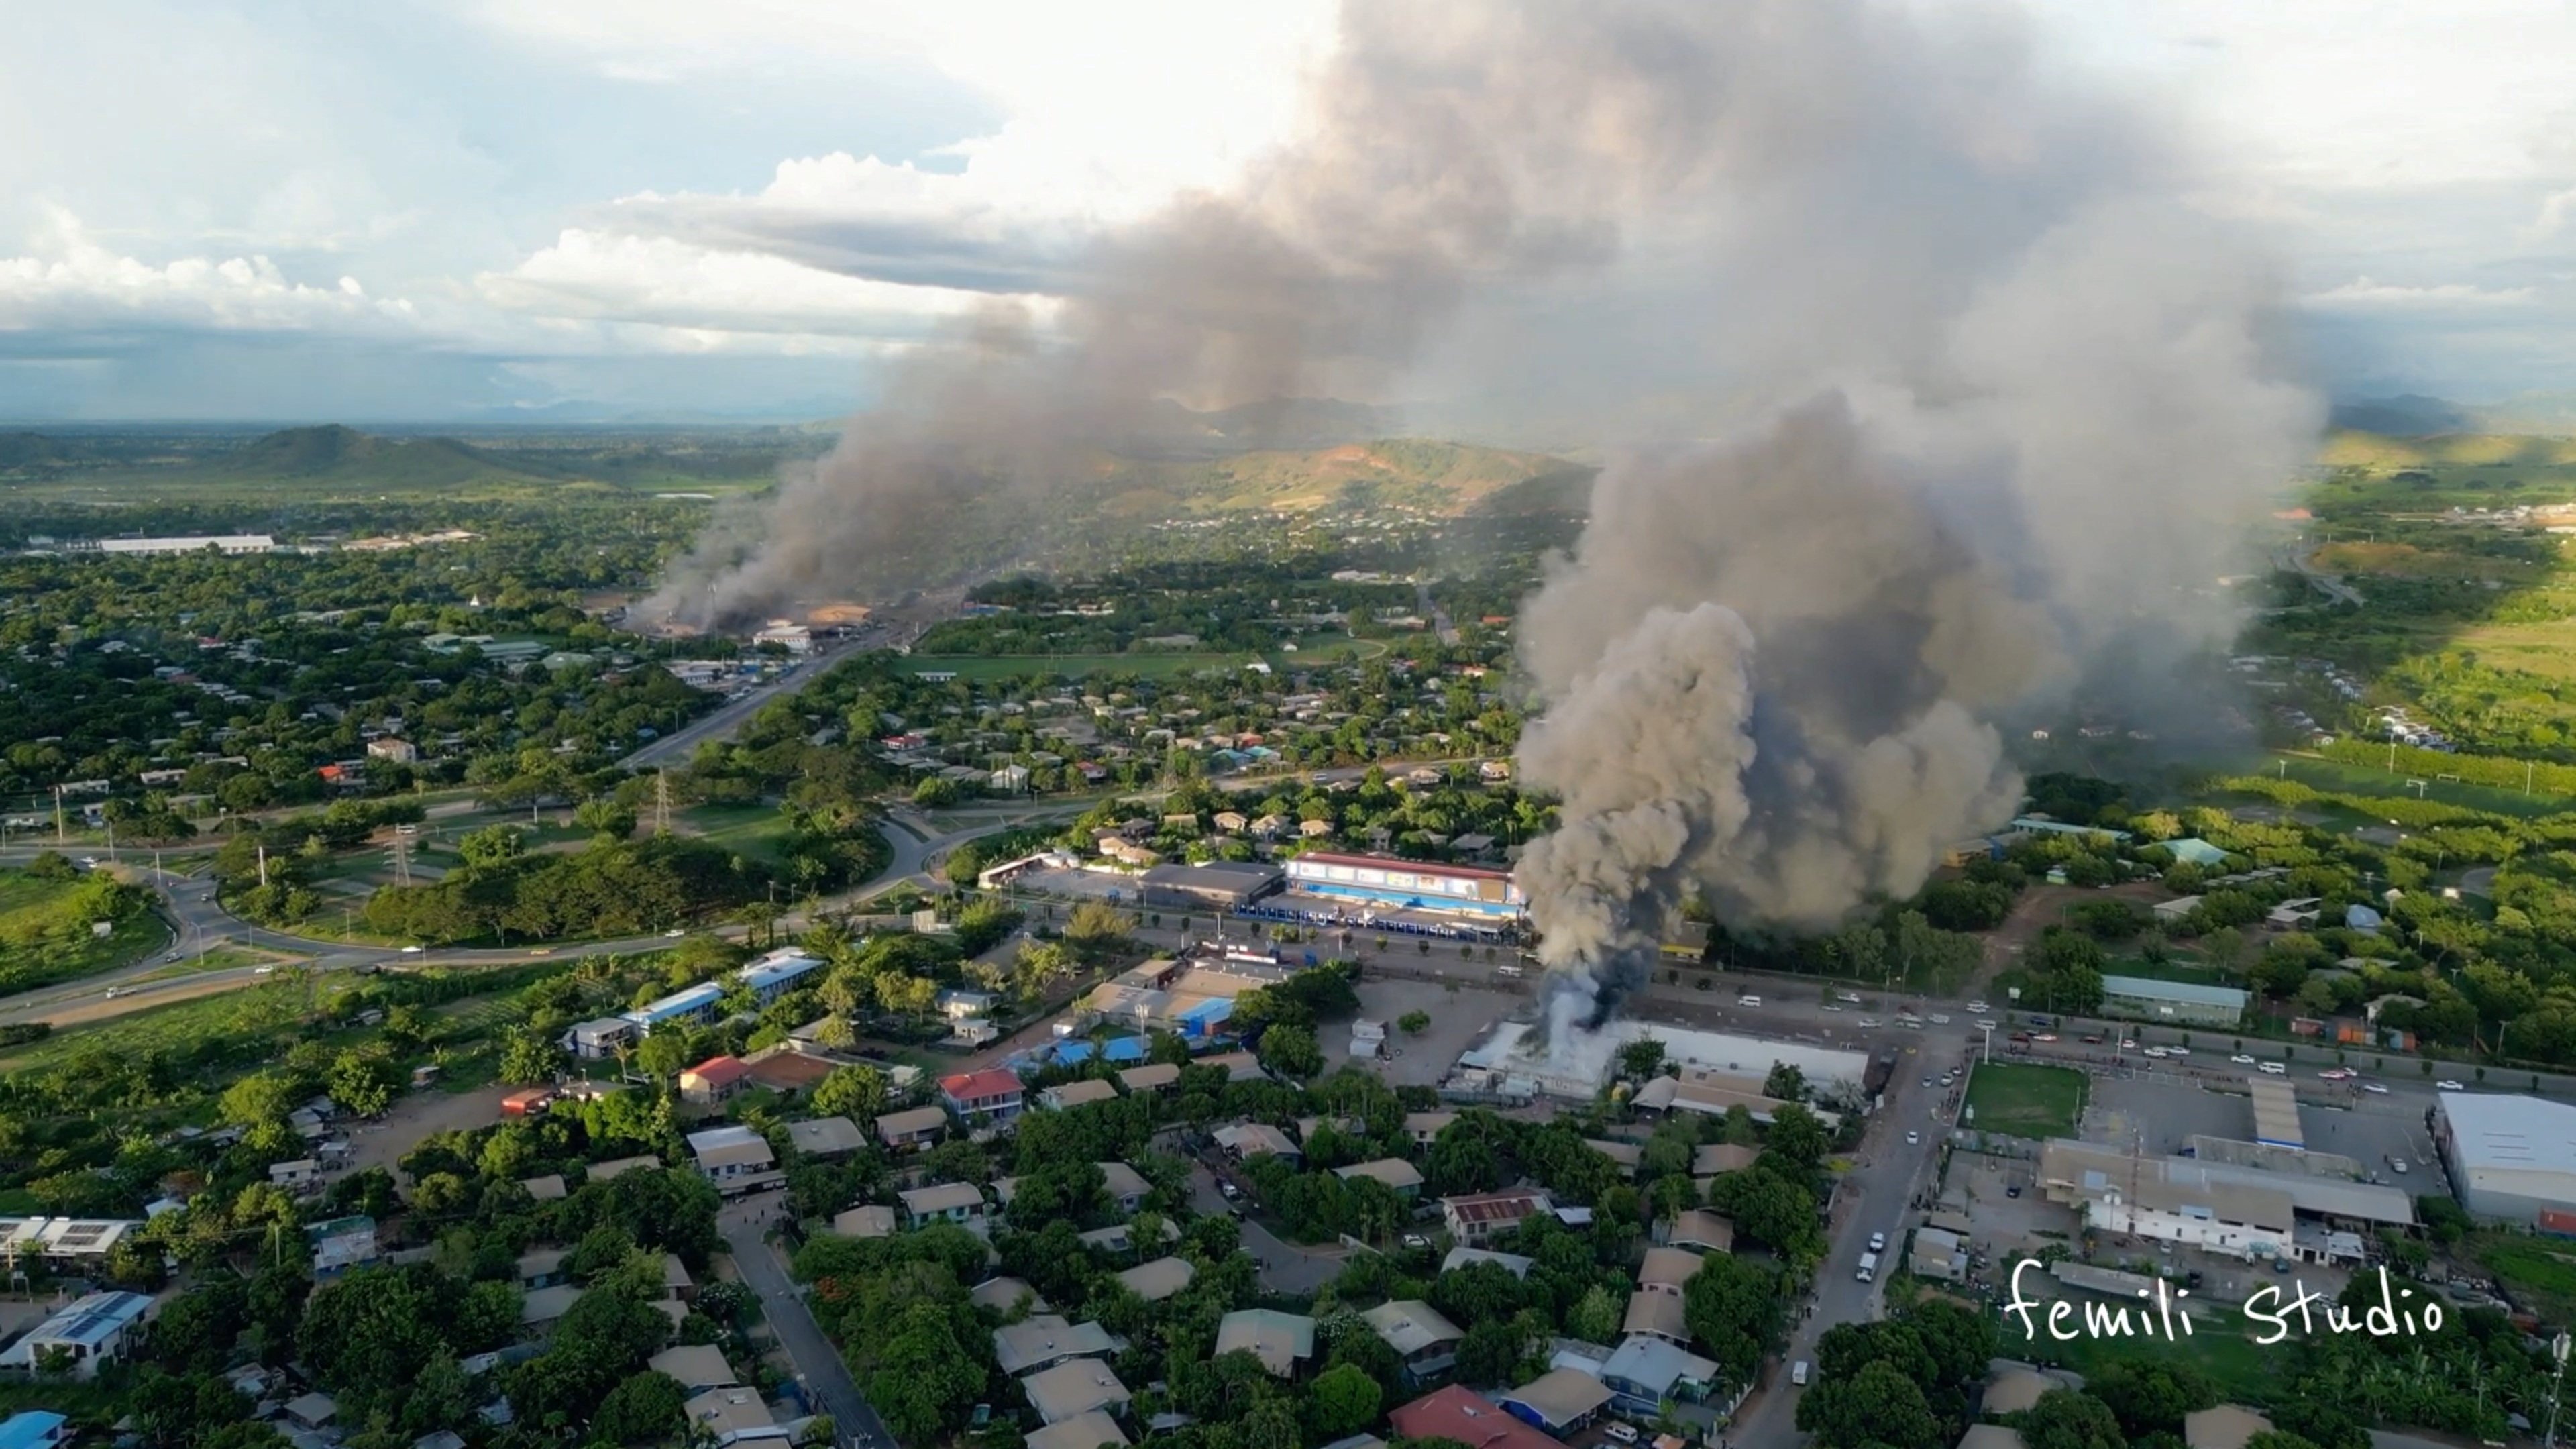 An aerial view of smoke billowing from burning buildings in Port Moresby, Papua New Guinea, last month amid looting and arson during widespread protests and riots. Photo: Femli Studio via Reuters